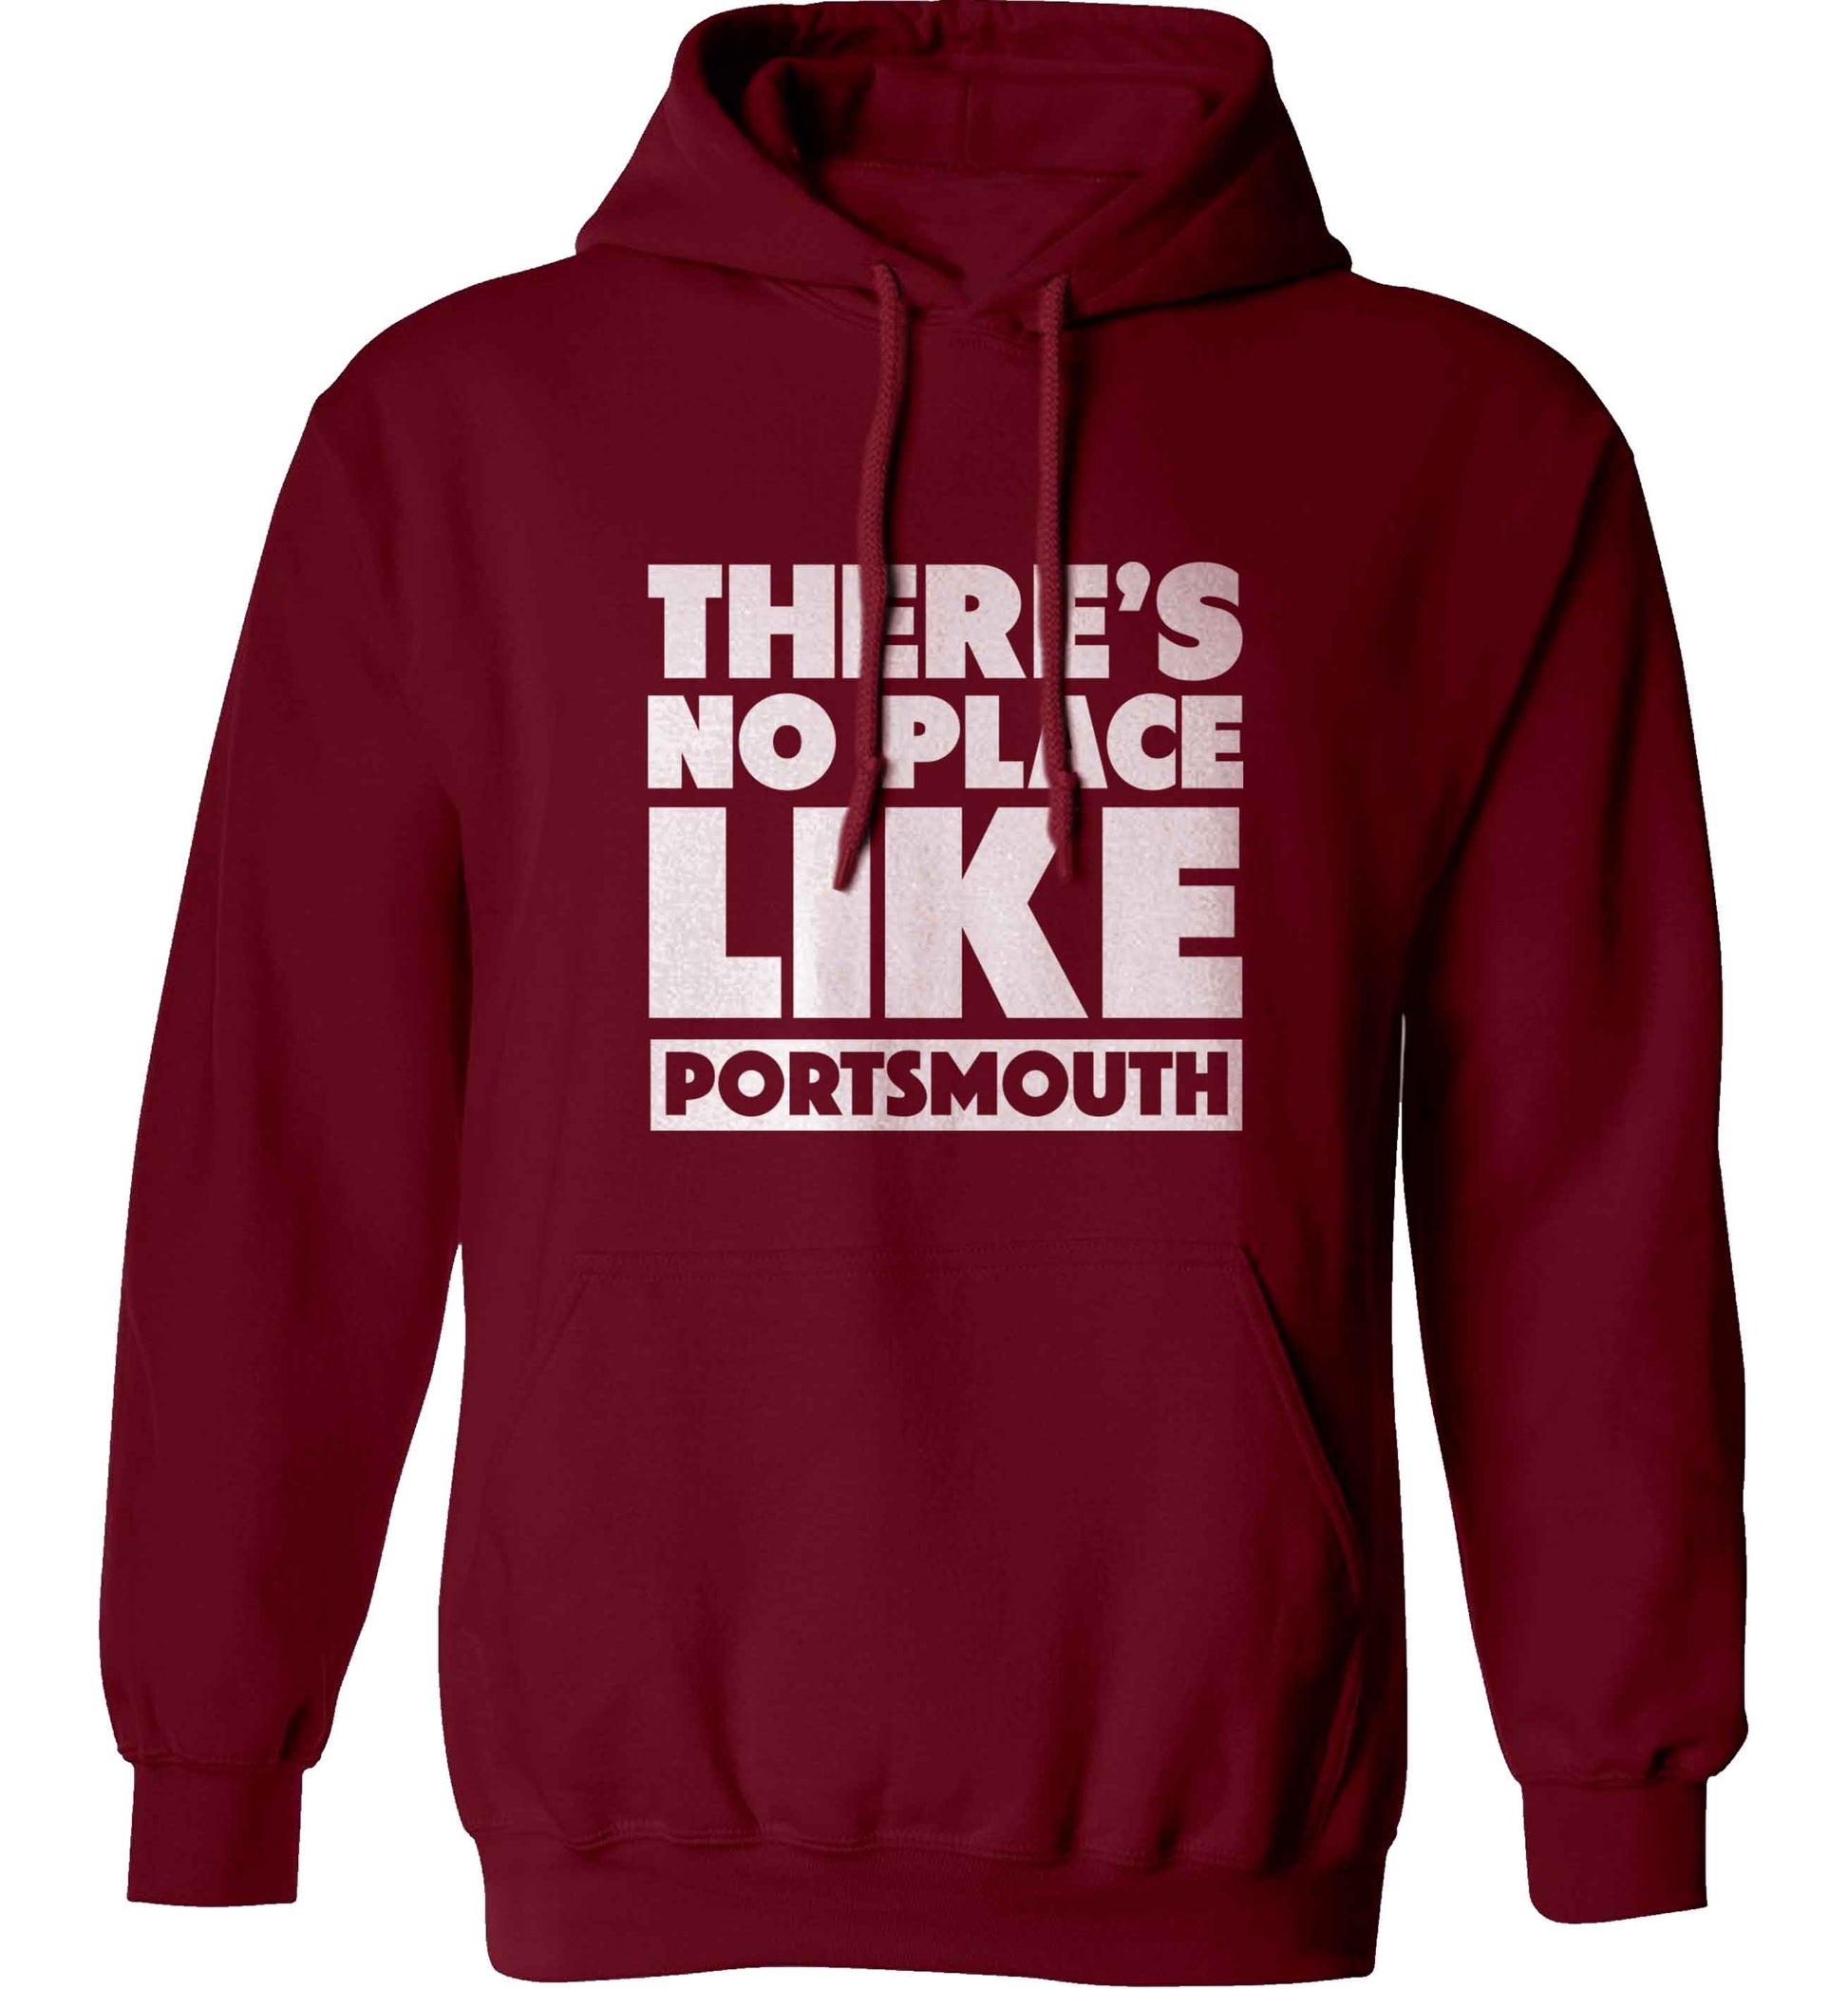 There's no place like Porstmouth adults unisex maroon hoodie 2XL